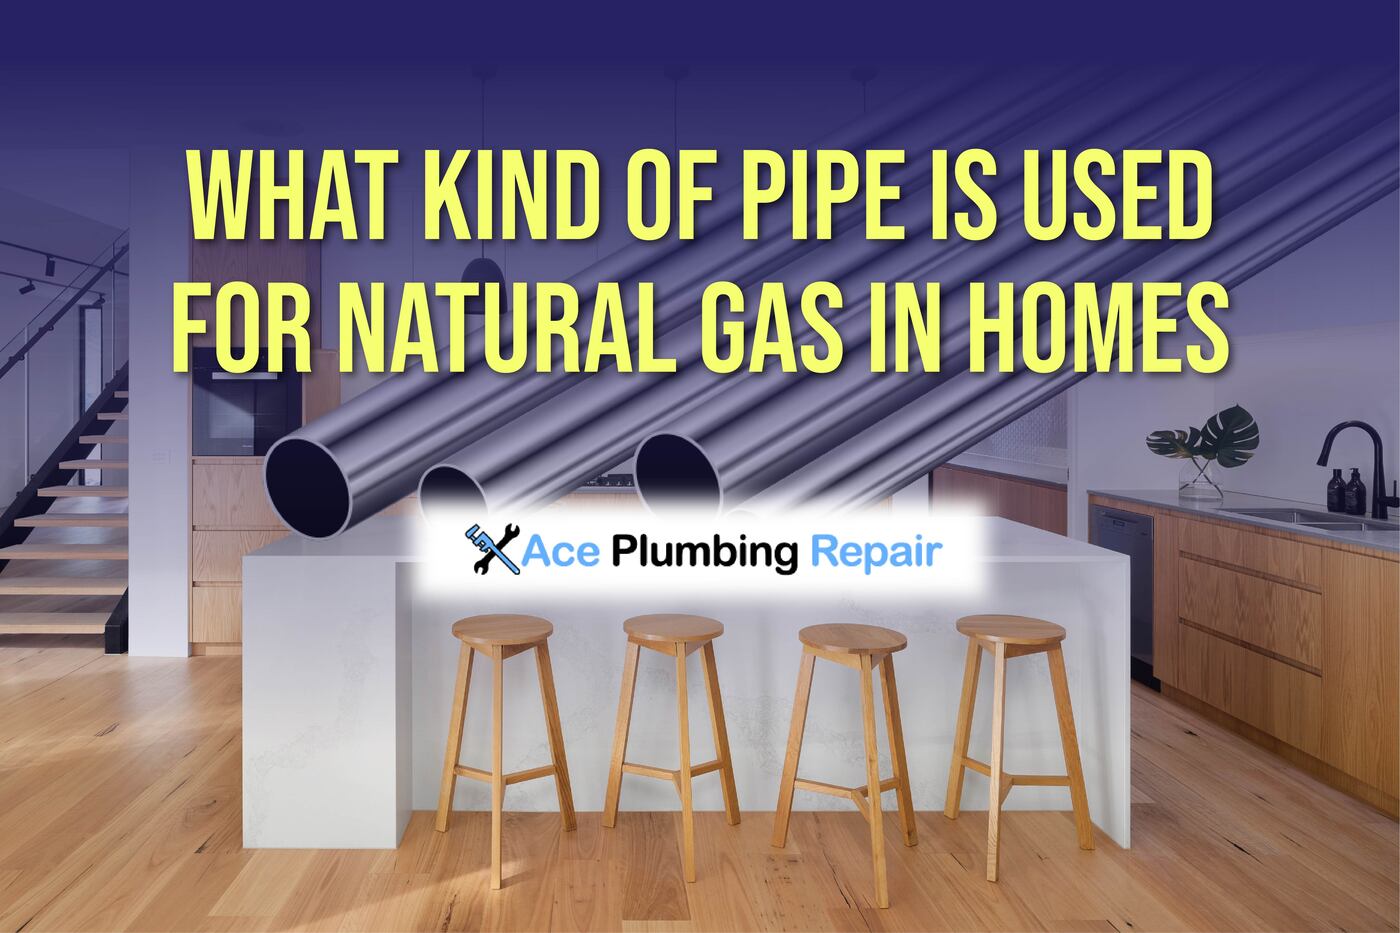 what kind of pipe is used for natural gas in homes?